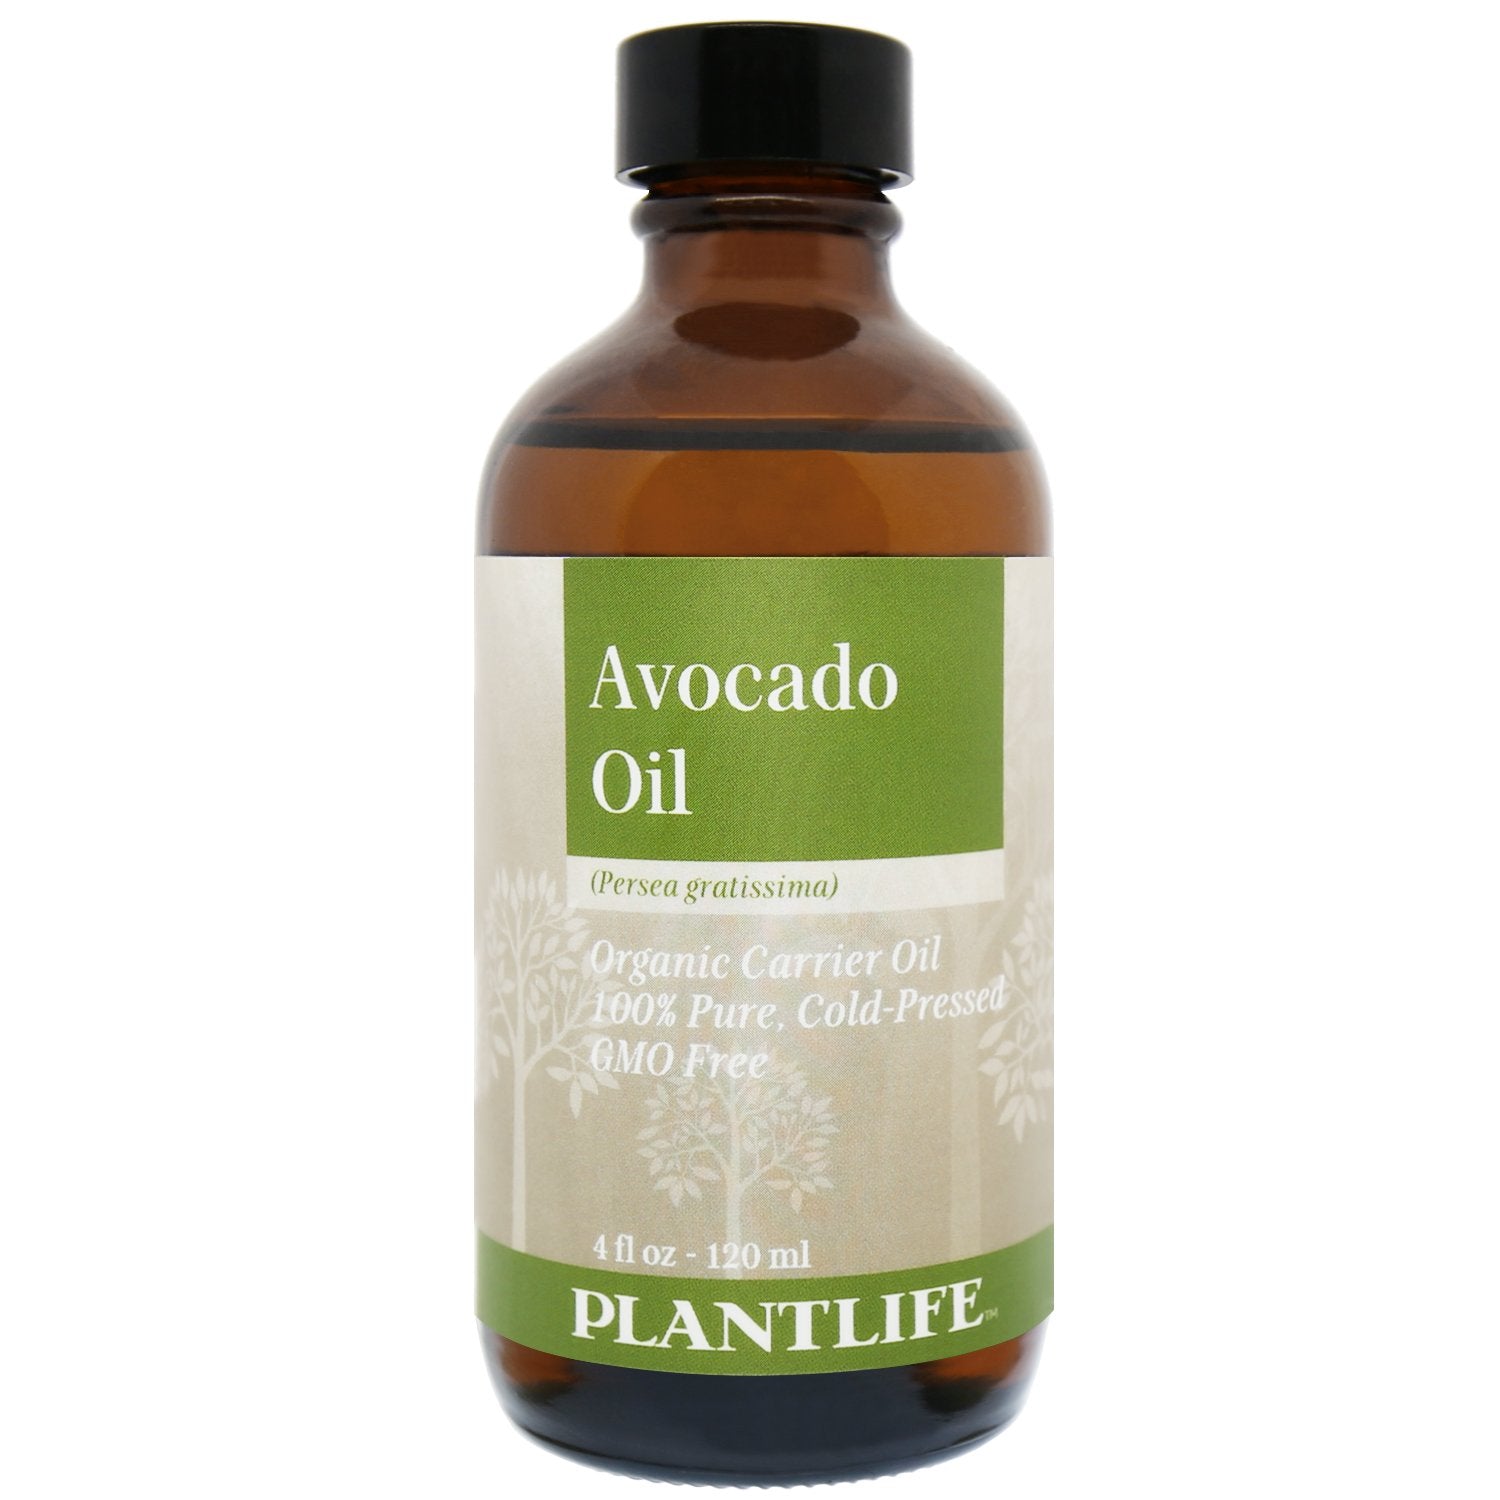 Plantlife Avocado Carrier Oil - Cold Pressed, Non-GMO, and Gluten Free